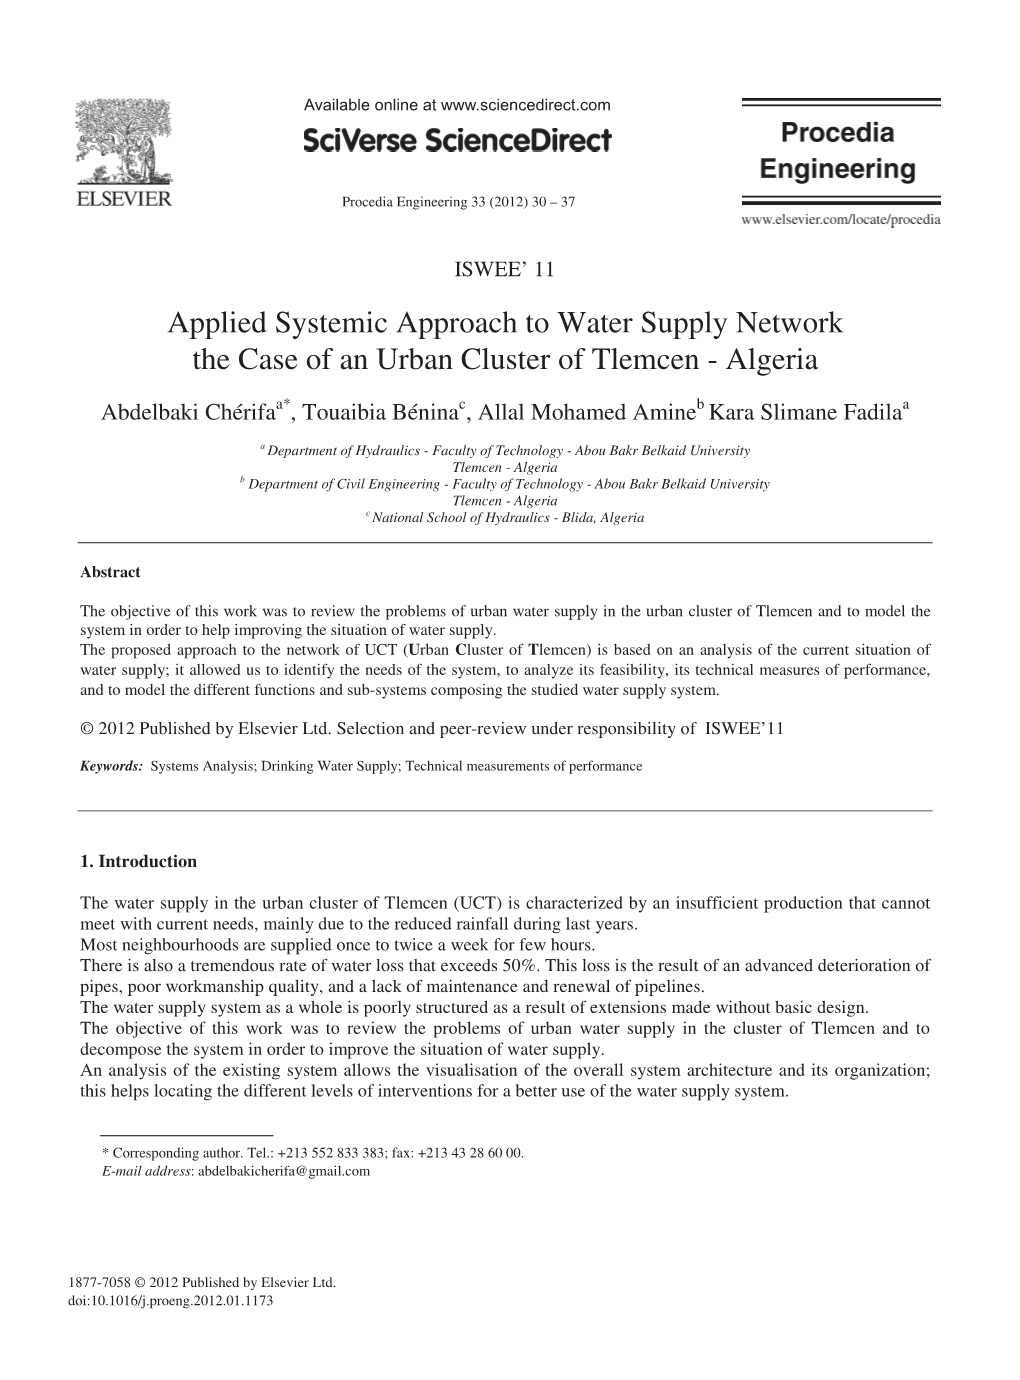 Applied Systemic Approach to Water Supply Network the Case of an Urban Cluster of Tlemcen - Algeria